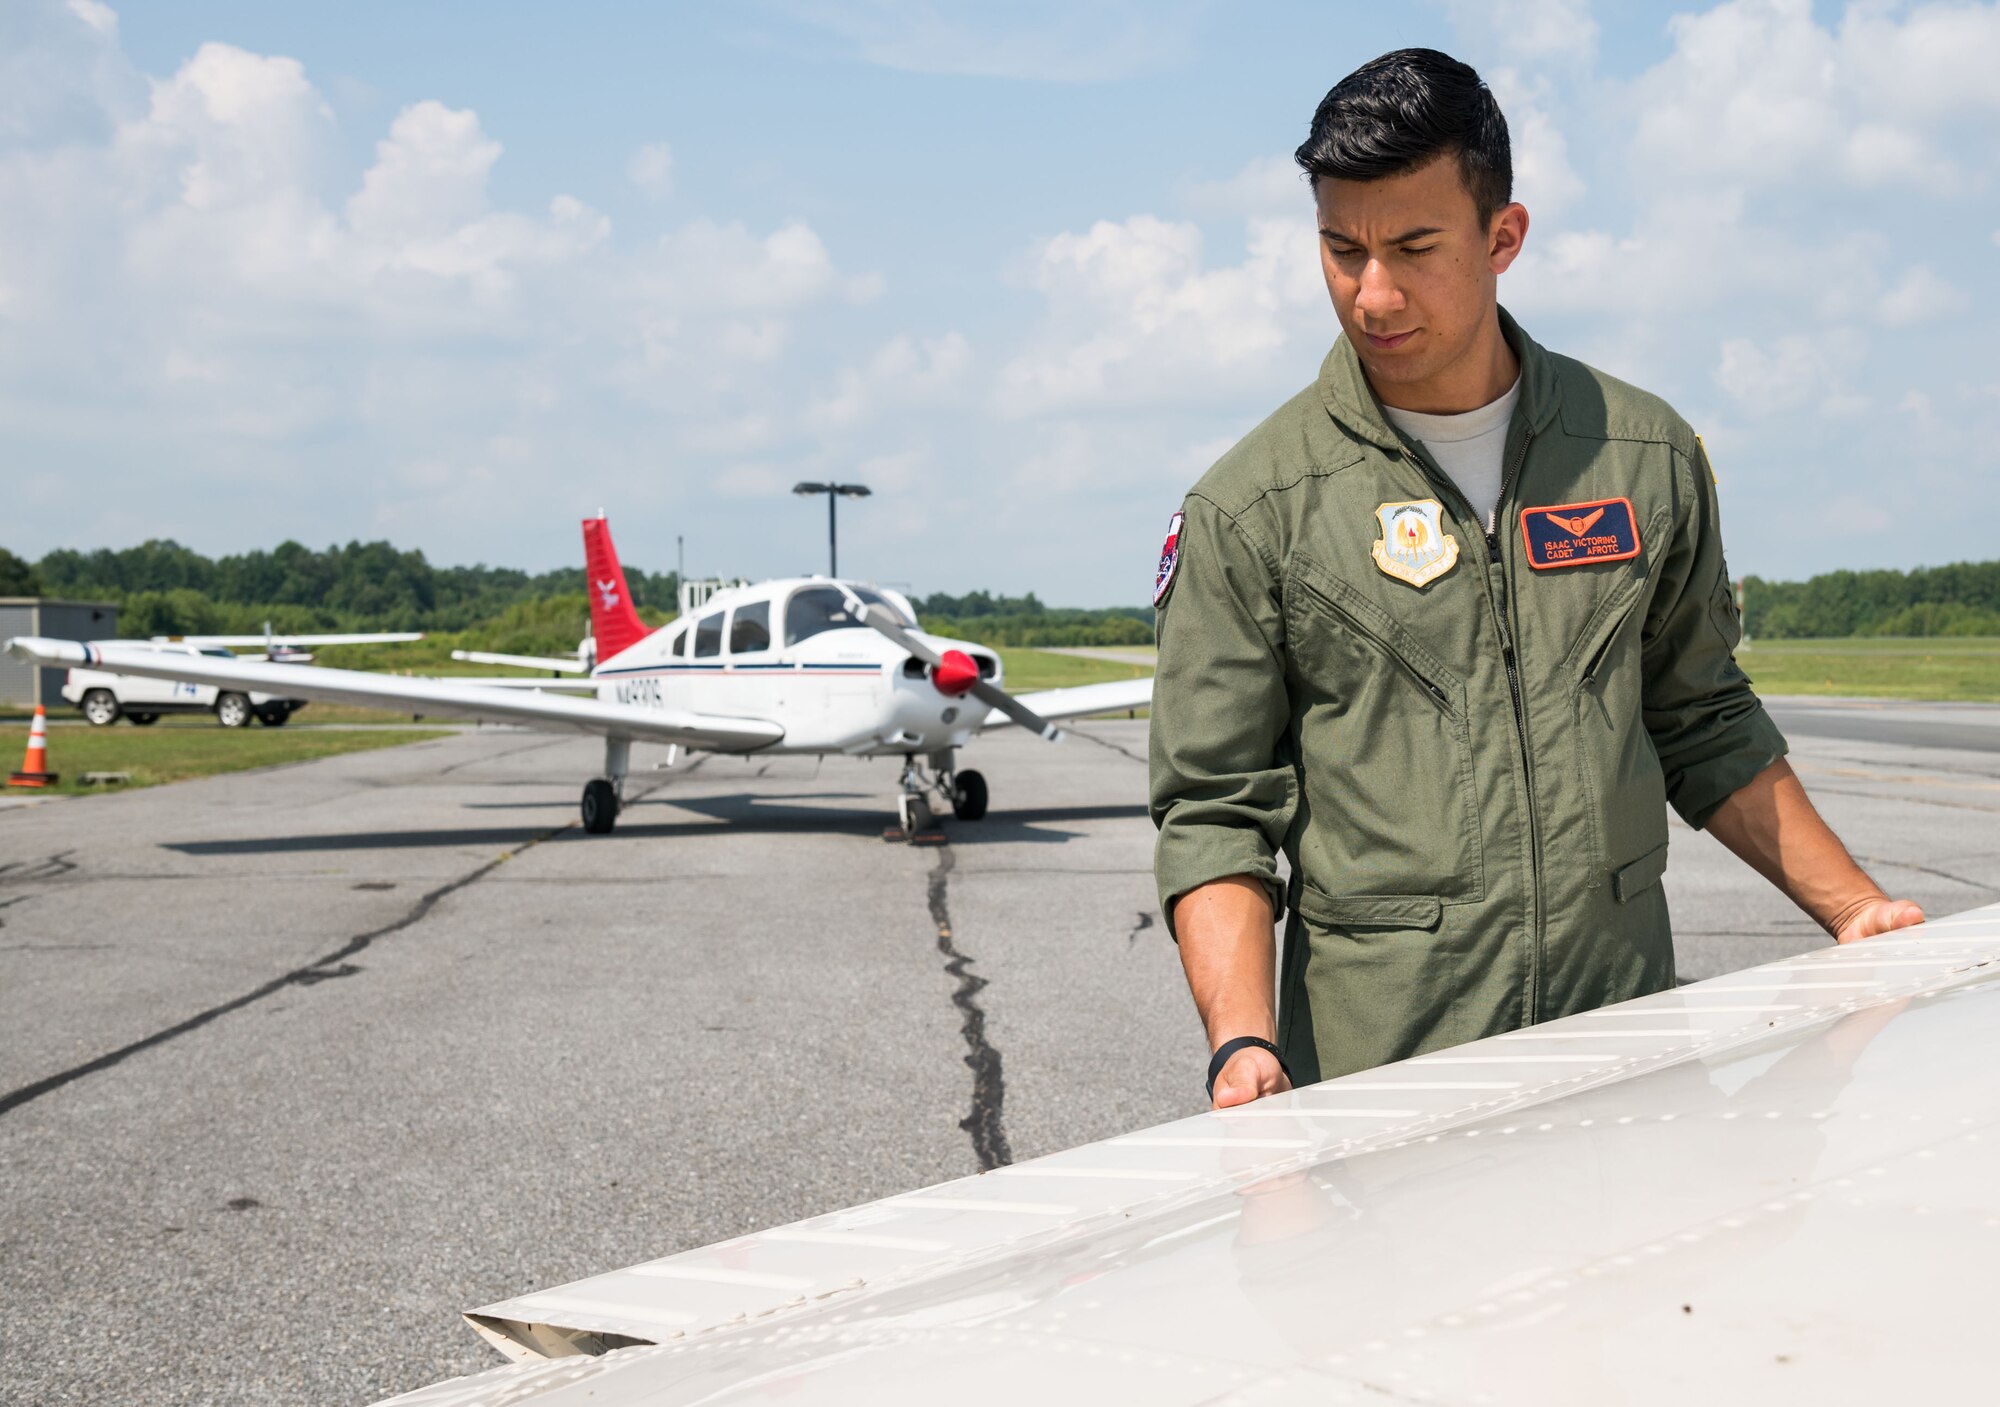 Air Force Junior Reserve Officers’ Training Corps cadet Isaac Victorino, checks the left wing on a Piper Warrior II during the preflight of the aircraft Aug. 6, 2019, at Delaware Airpark in Cheswold, Del. Victorino and Mohammad Ahmed, Delaware State University certified flight instructor, flew around the airpark and practiced skills learned during the eight-week AFJROTC Summer Flight Academy held at DSU in Dover. Victorino is a cadet with AFROTC Detachment 842, University of Texas at San Antonio. (U.S. Air Force photo by Roland Balik)